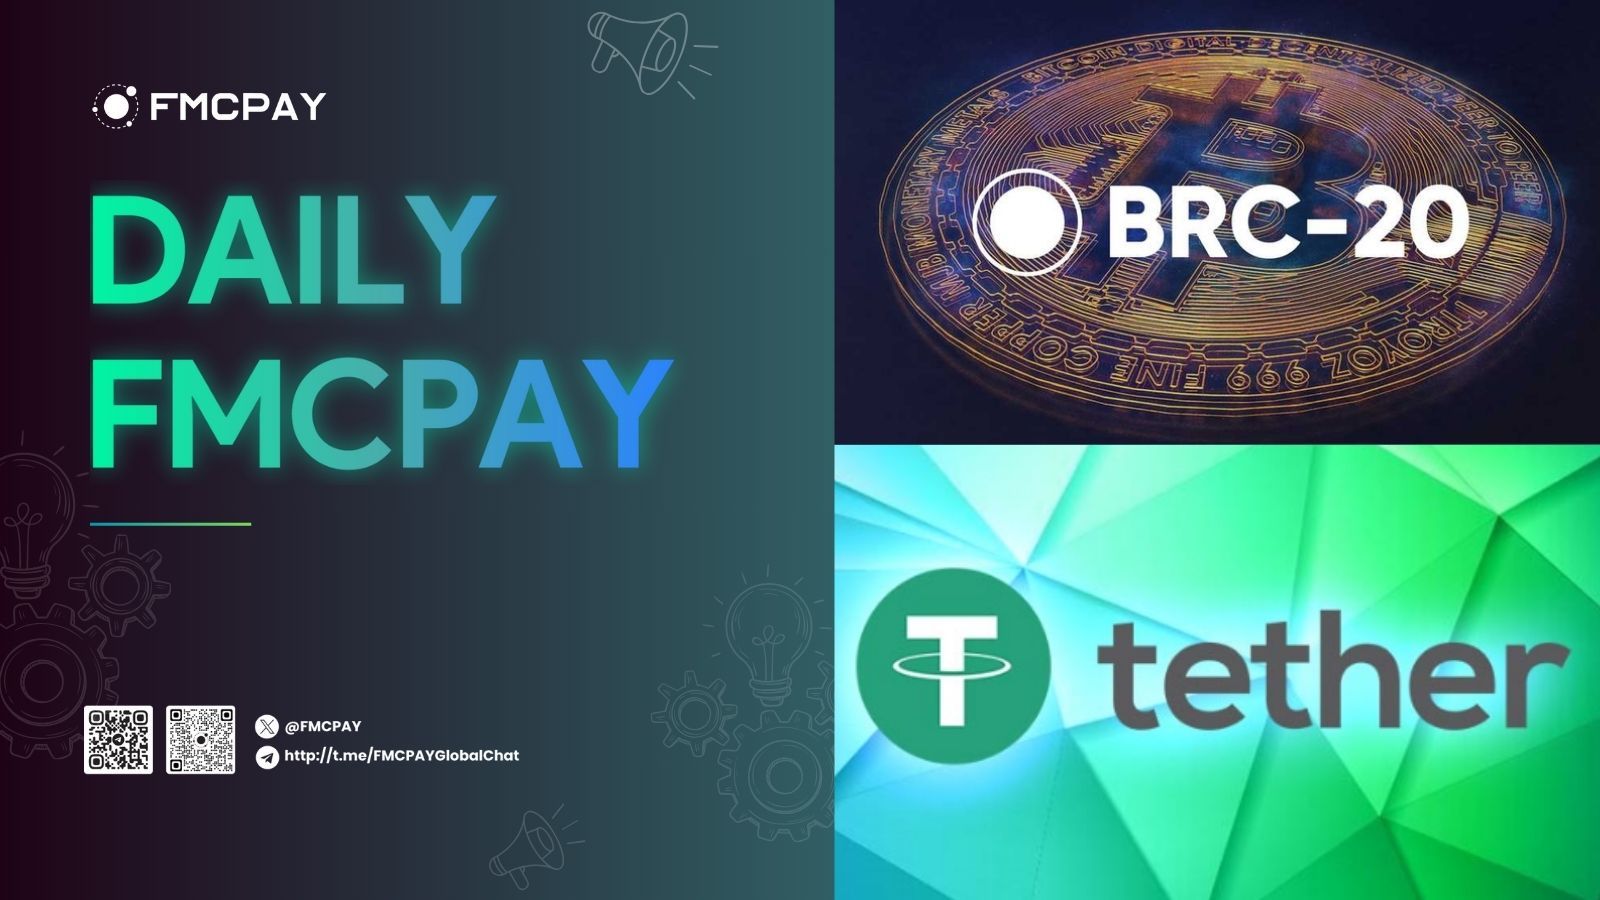 fmcpay brc 20 tokens bleed ahead of bitcoin halving as trader focus shifts to runes